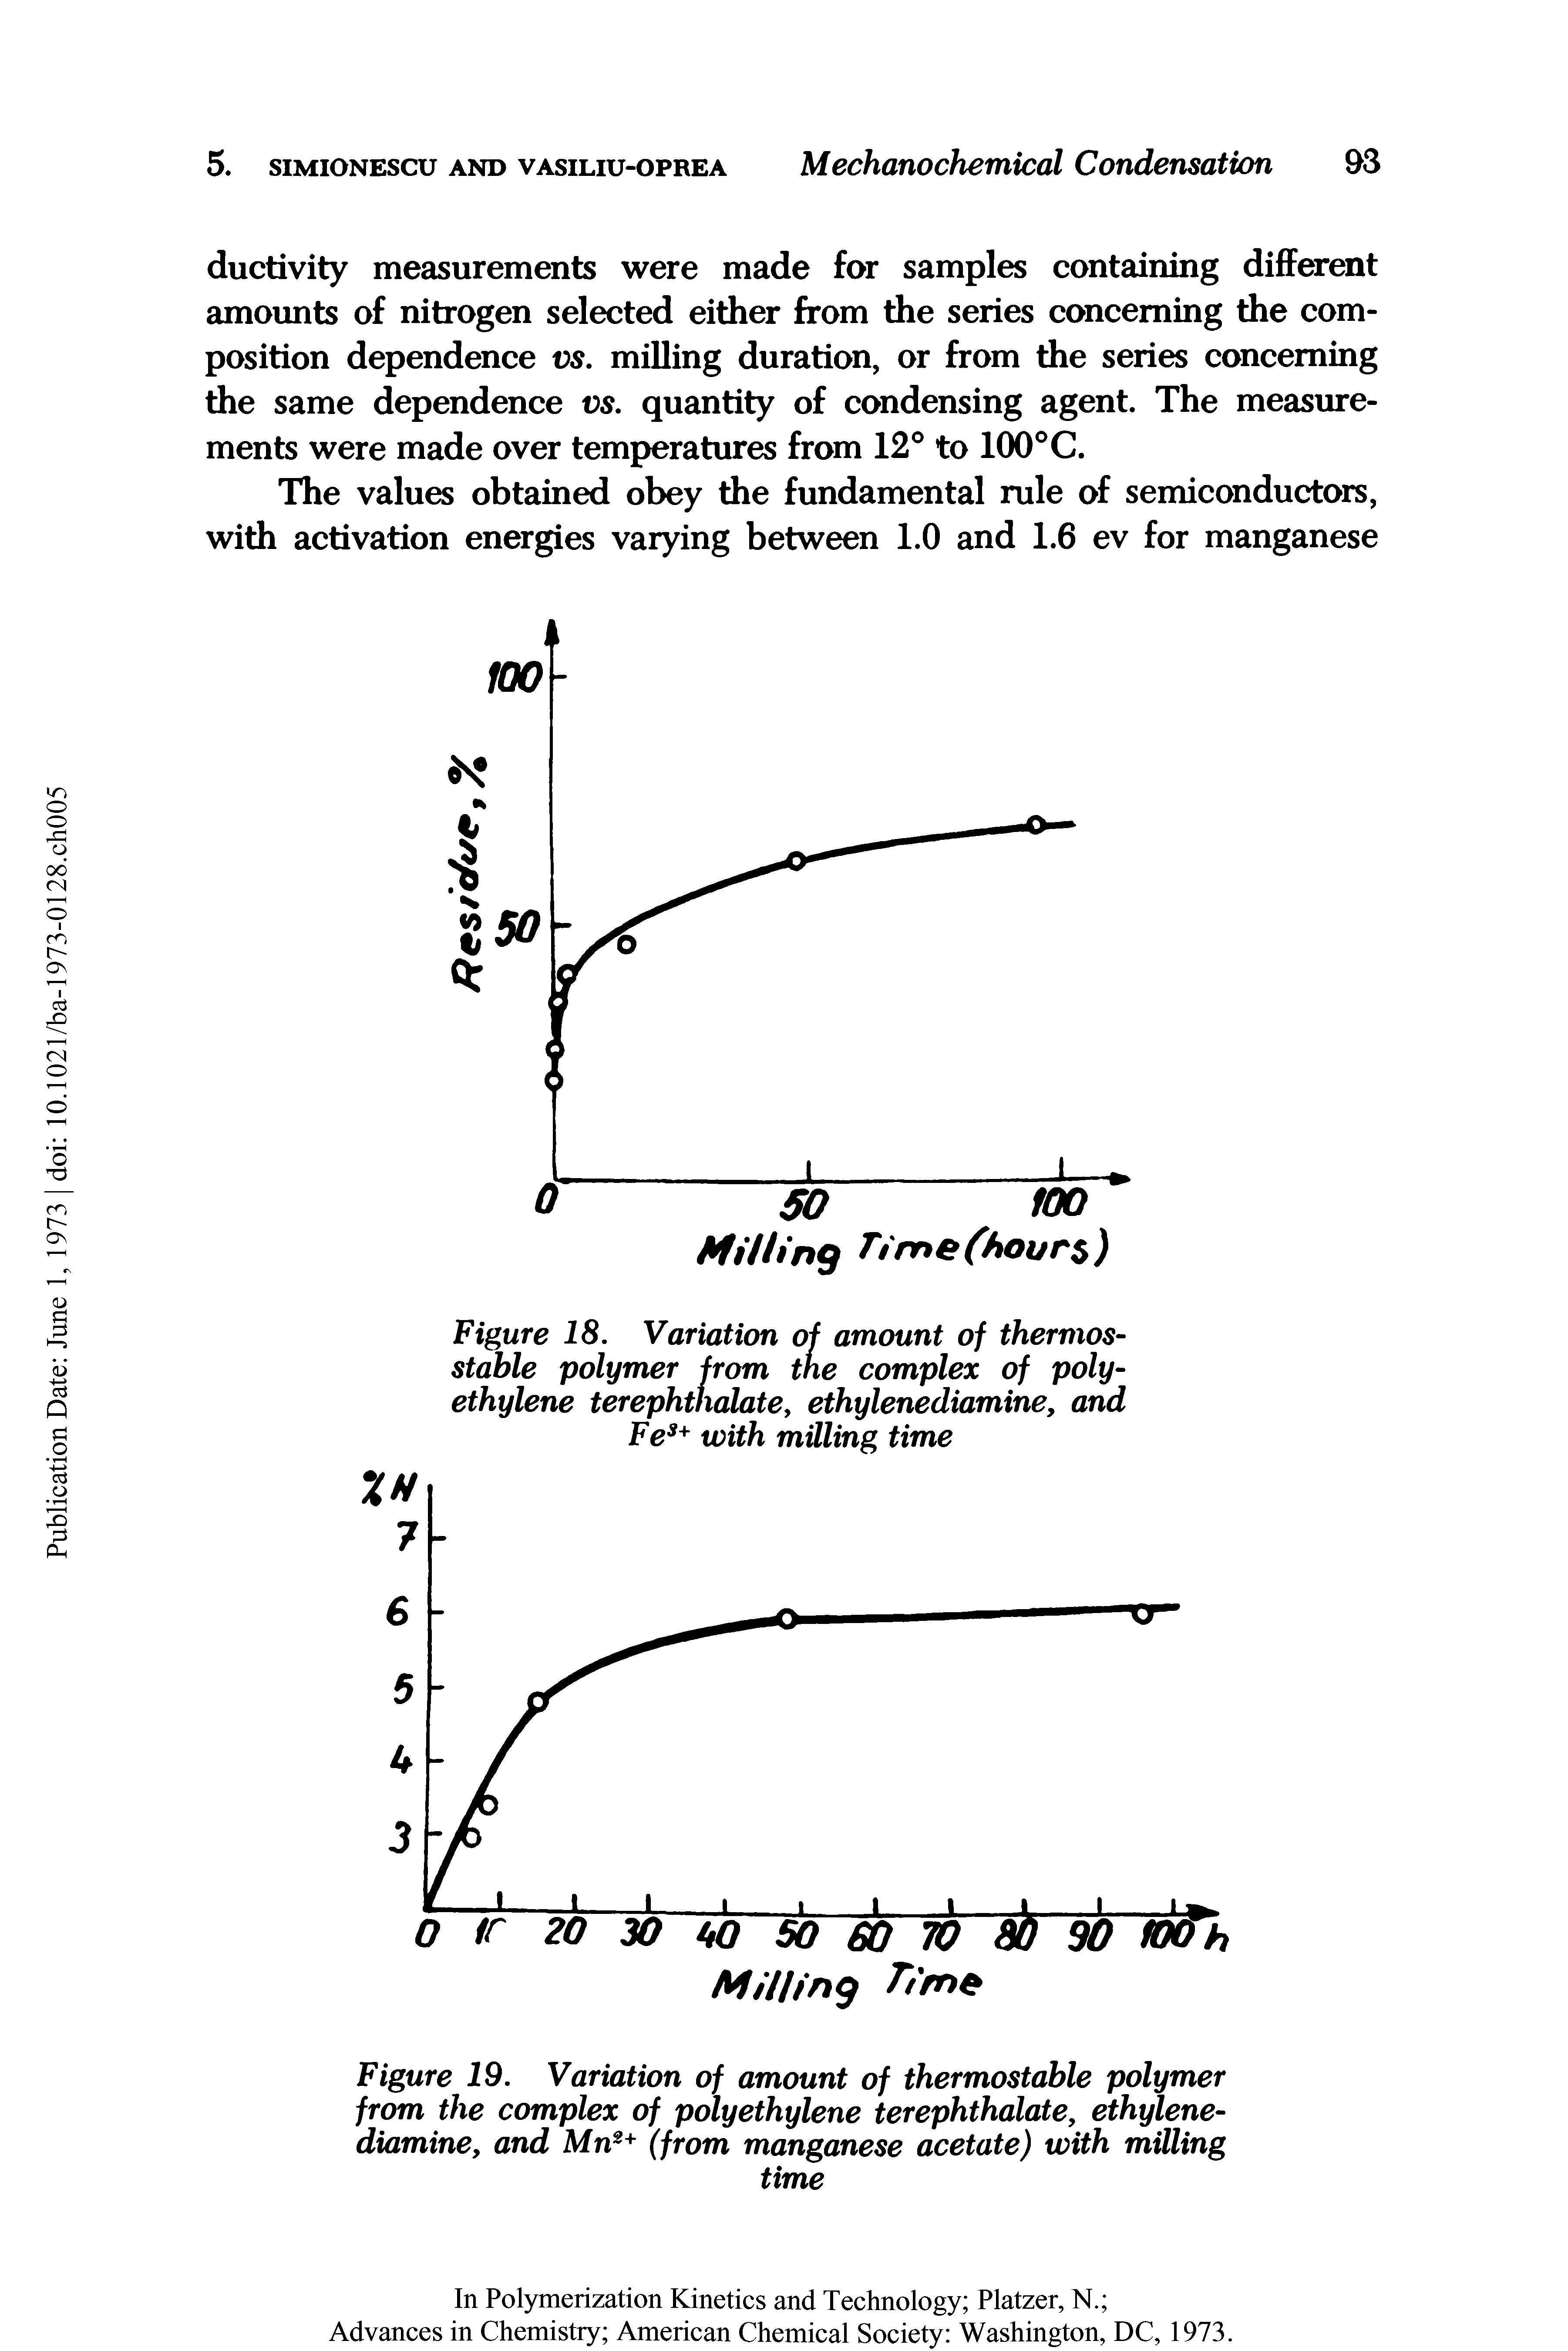 Figure 18. Variation of amount of thermos-stable polymer from the complex of poly-ethylene terephthalate, ethylenediamine, and Fes+ with milling time...